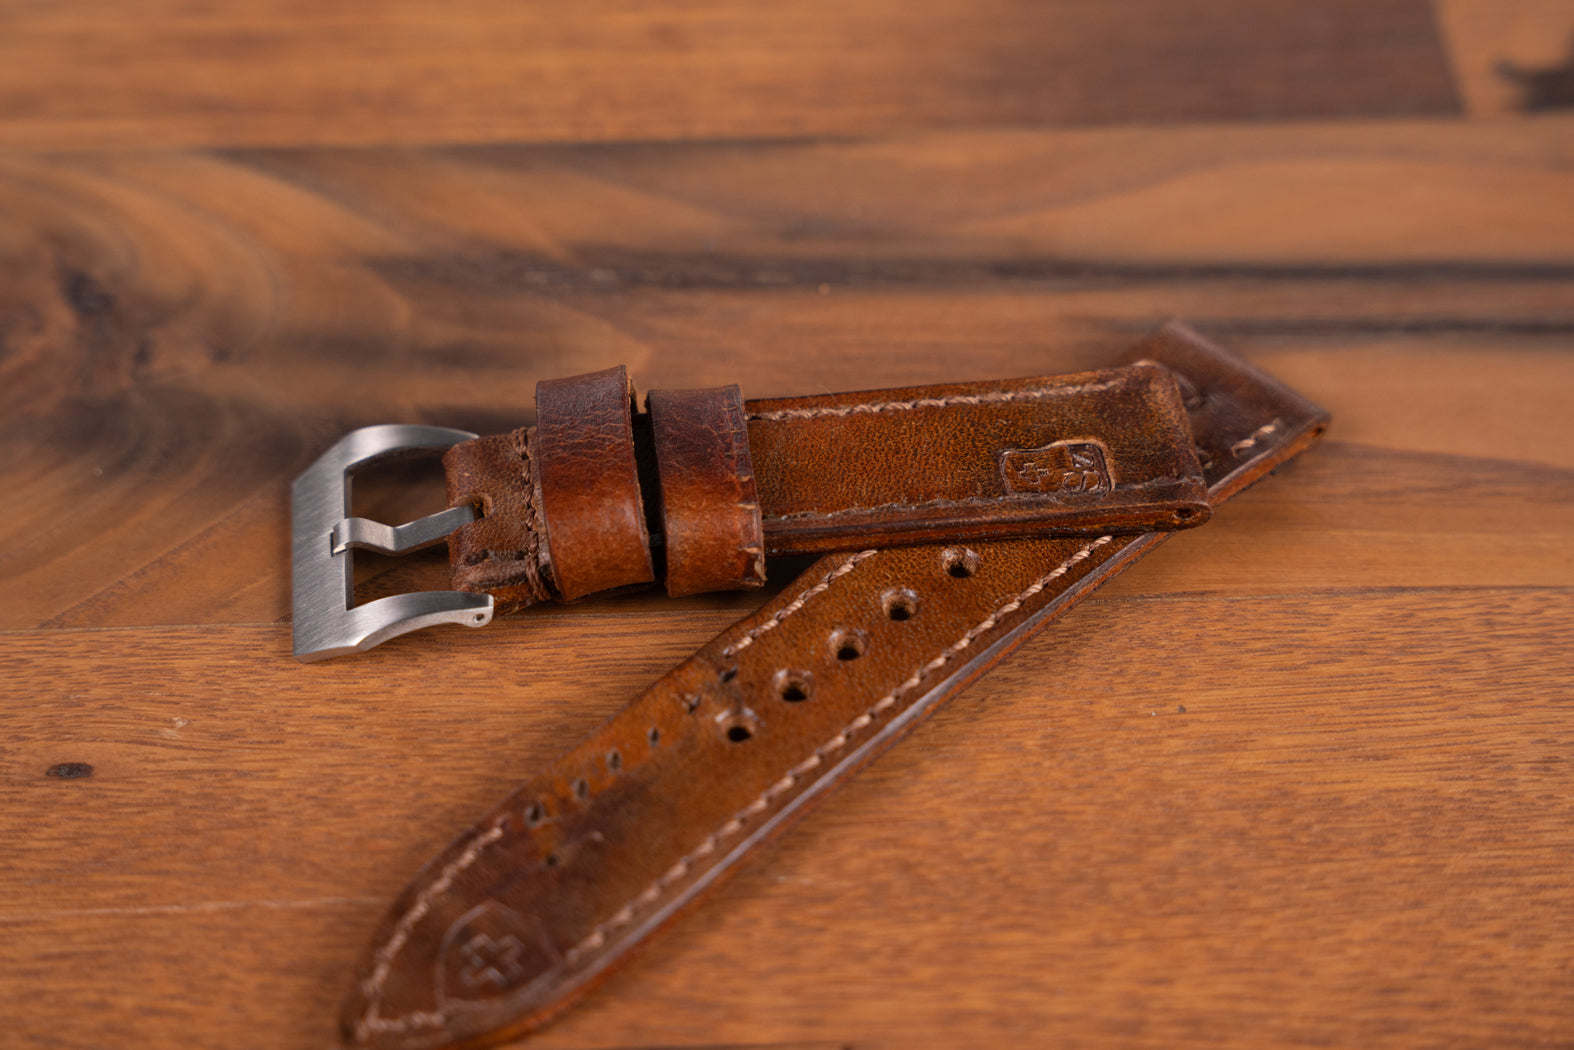 Ammo Watch Strap - 051 - In Stock!